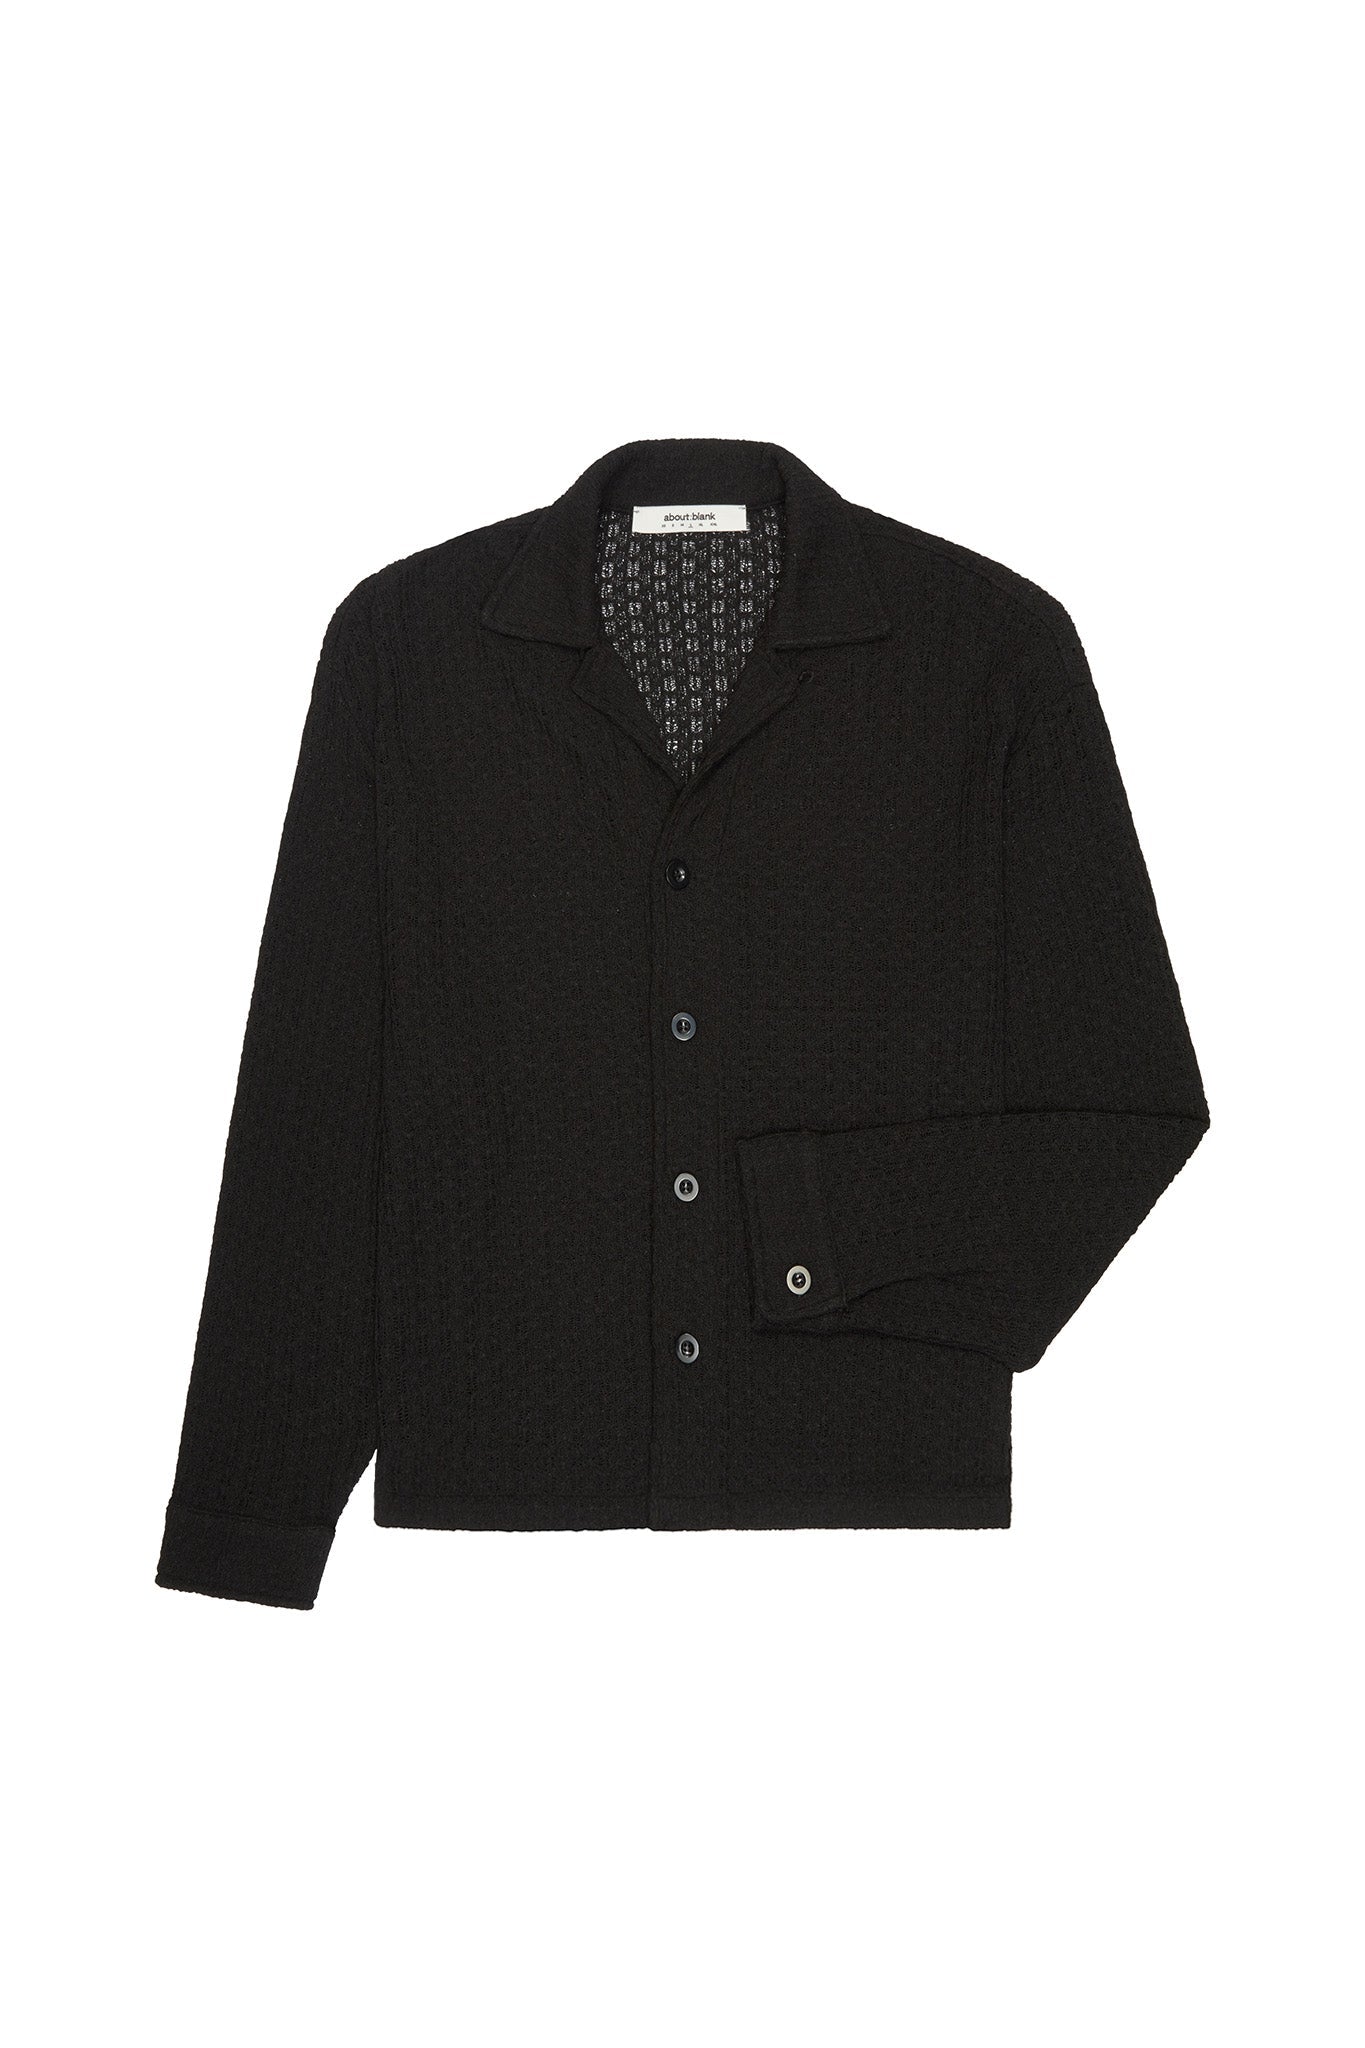 about---blank.comlong sleeve knitted shirt black